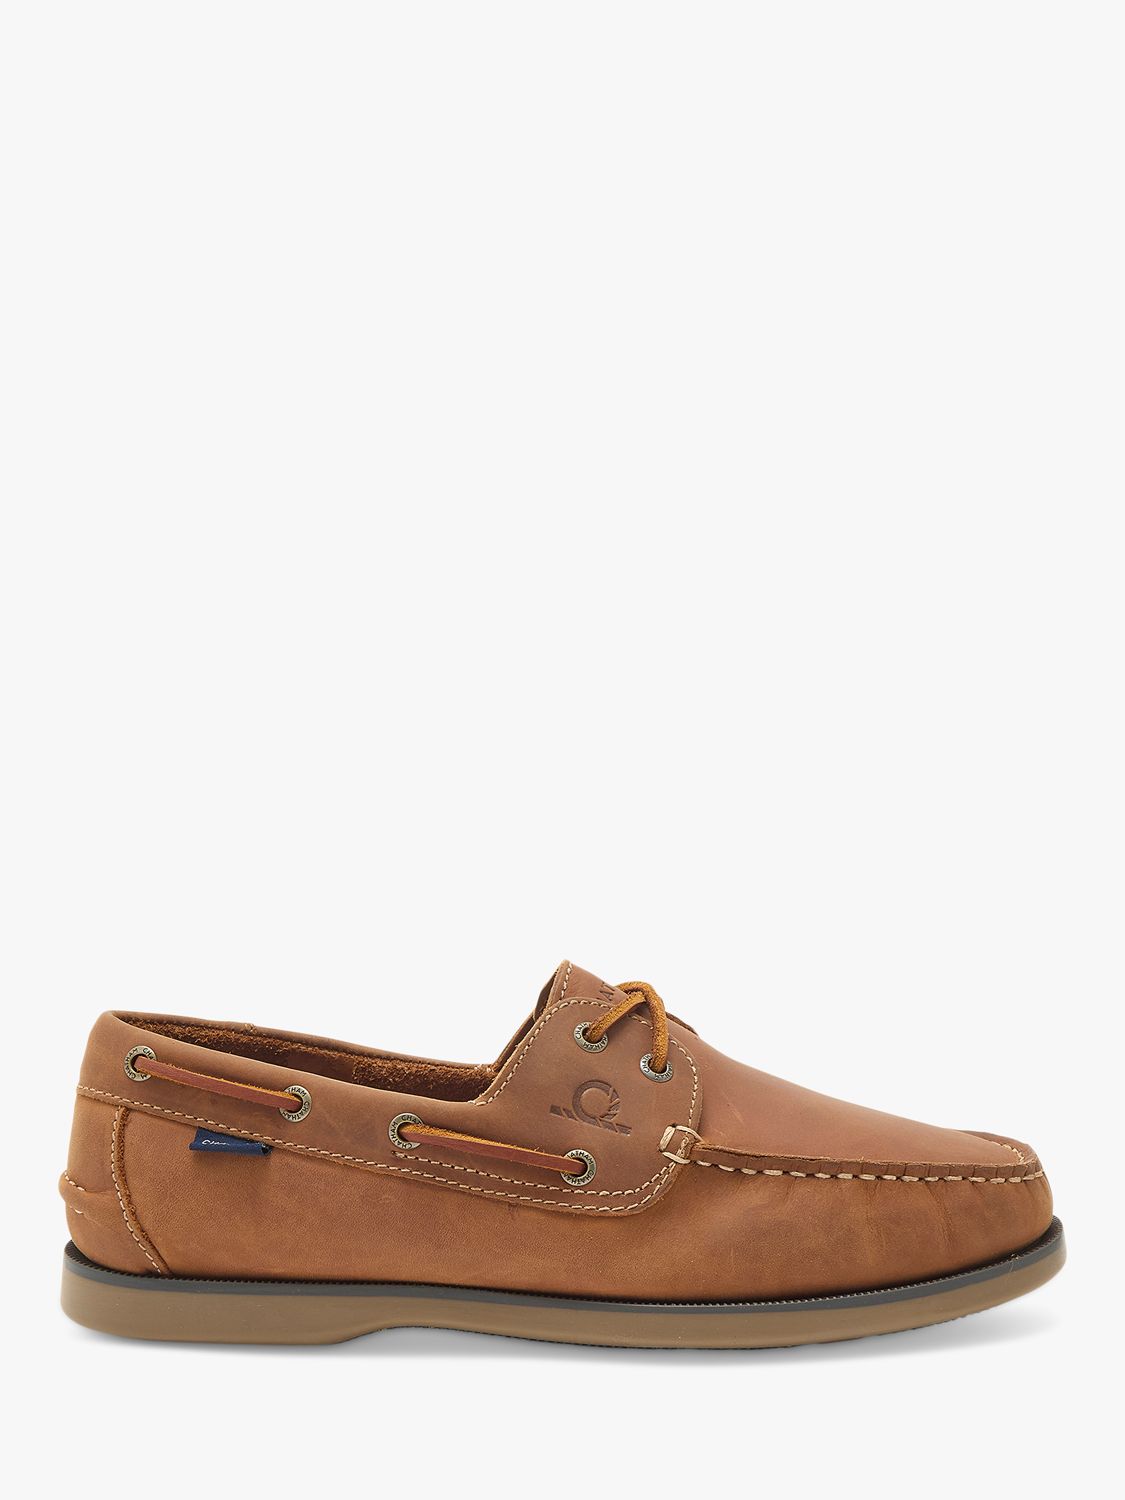 Chatham Whitstable Leather Boat Shoes, Tan at John Lewis & Partners